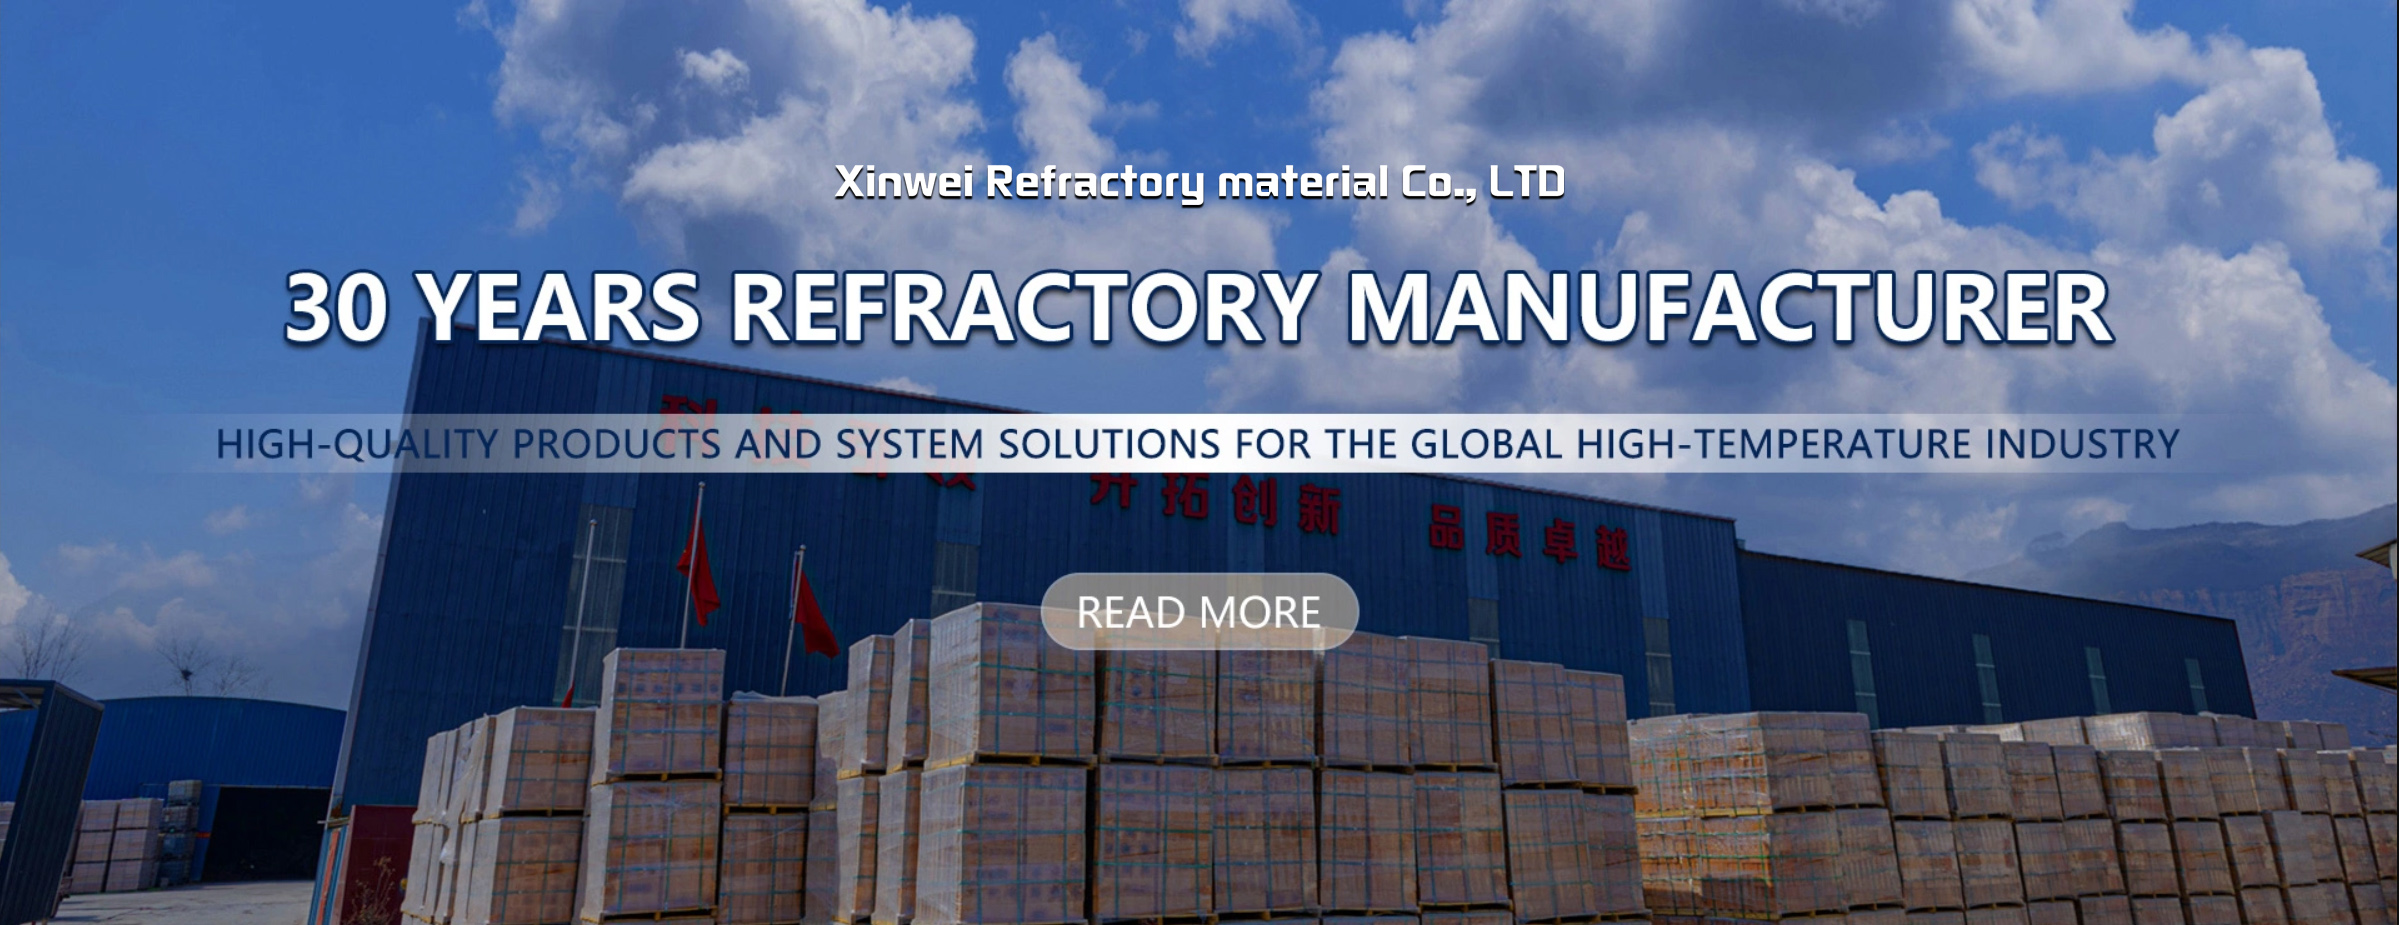 TO BE THE TECHNICAL SERVICE PROVIDER OF REFRACTORY INDUSTRY IN THE WORLD